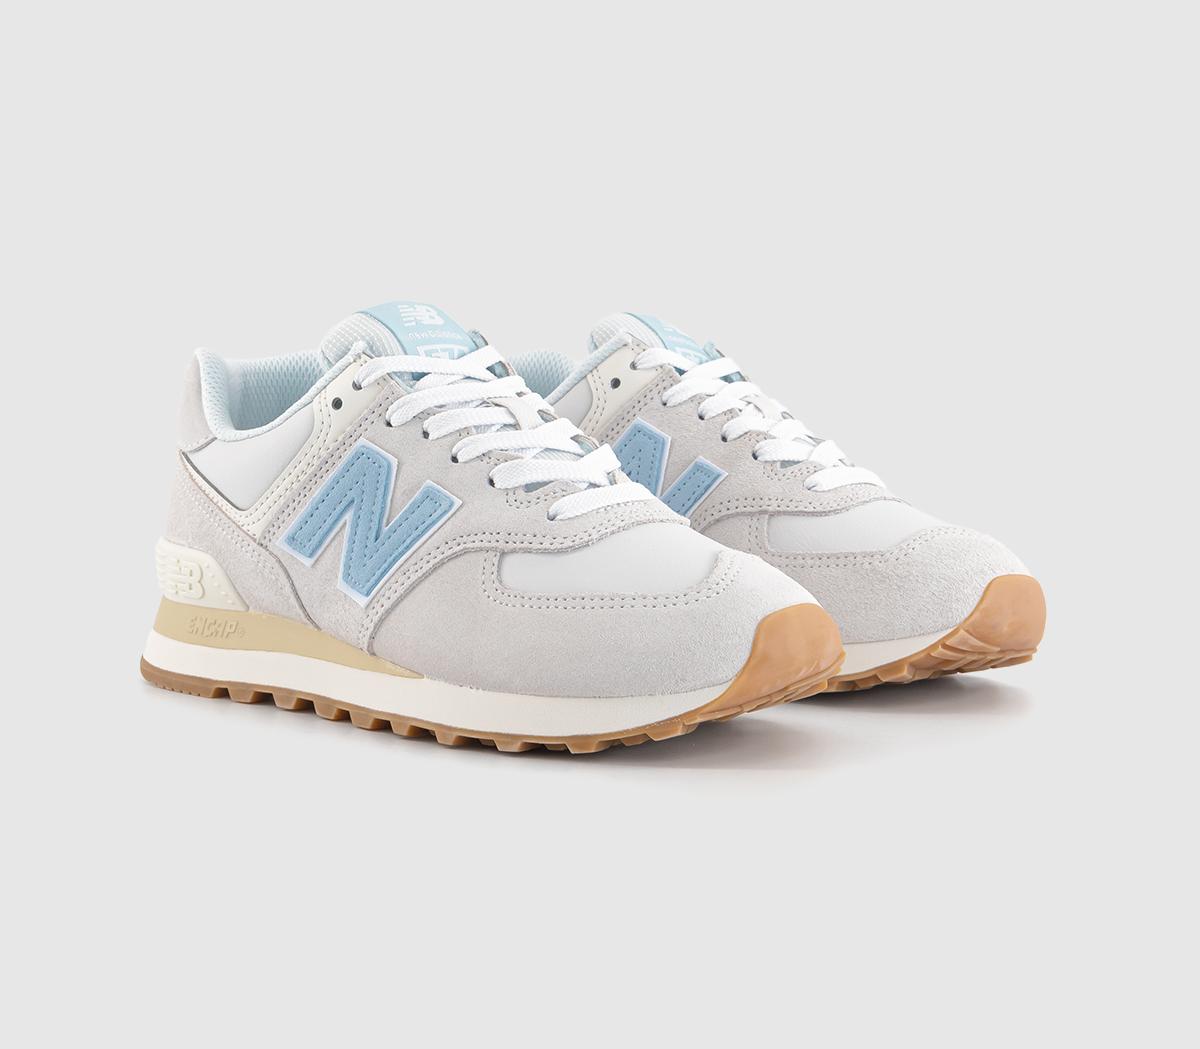 New Balance Mens 574 Trainers Reflection Natural, 5.5